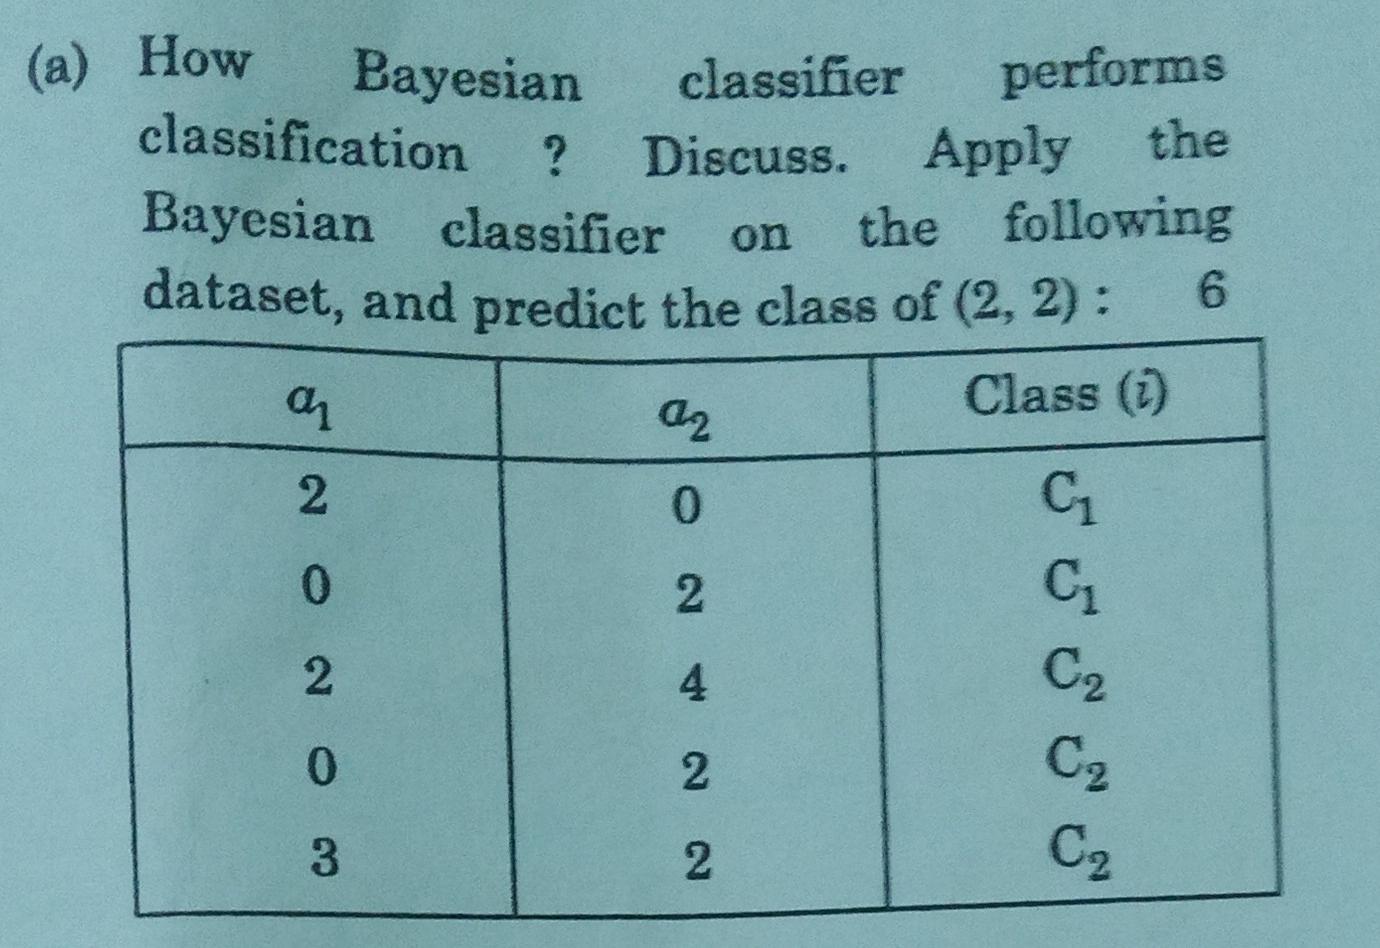 Bayesian classifier performs classification ? Discuss. Apply the Bayesian classifier on the following